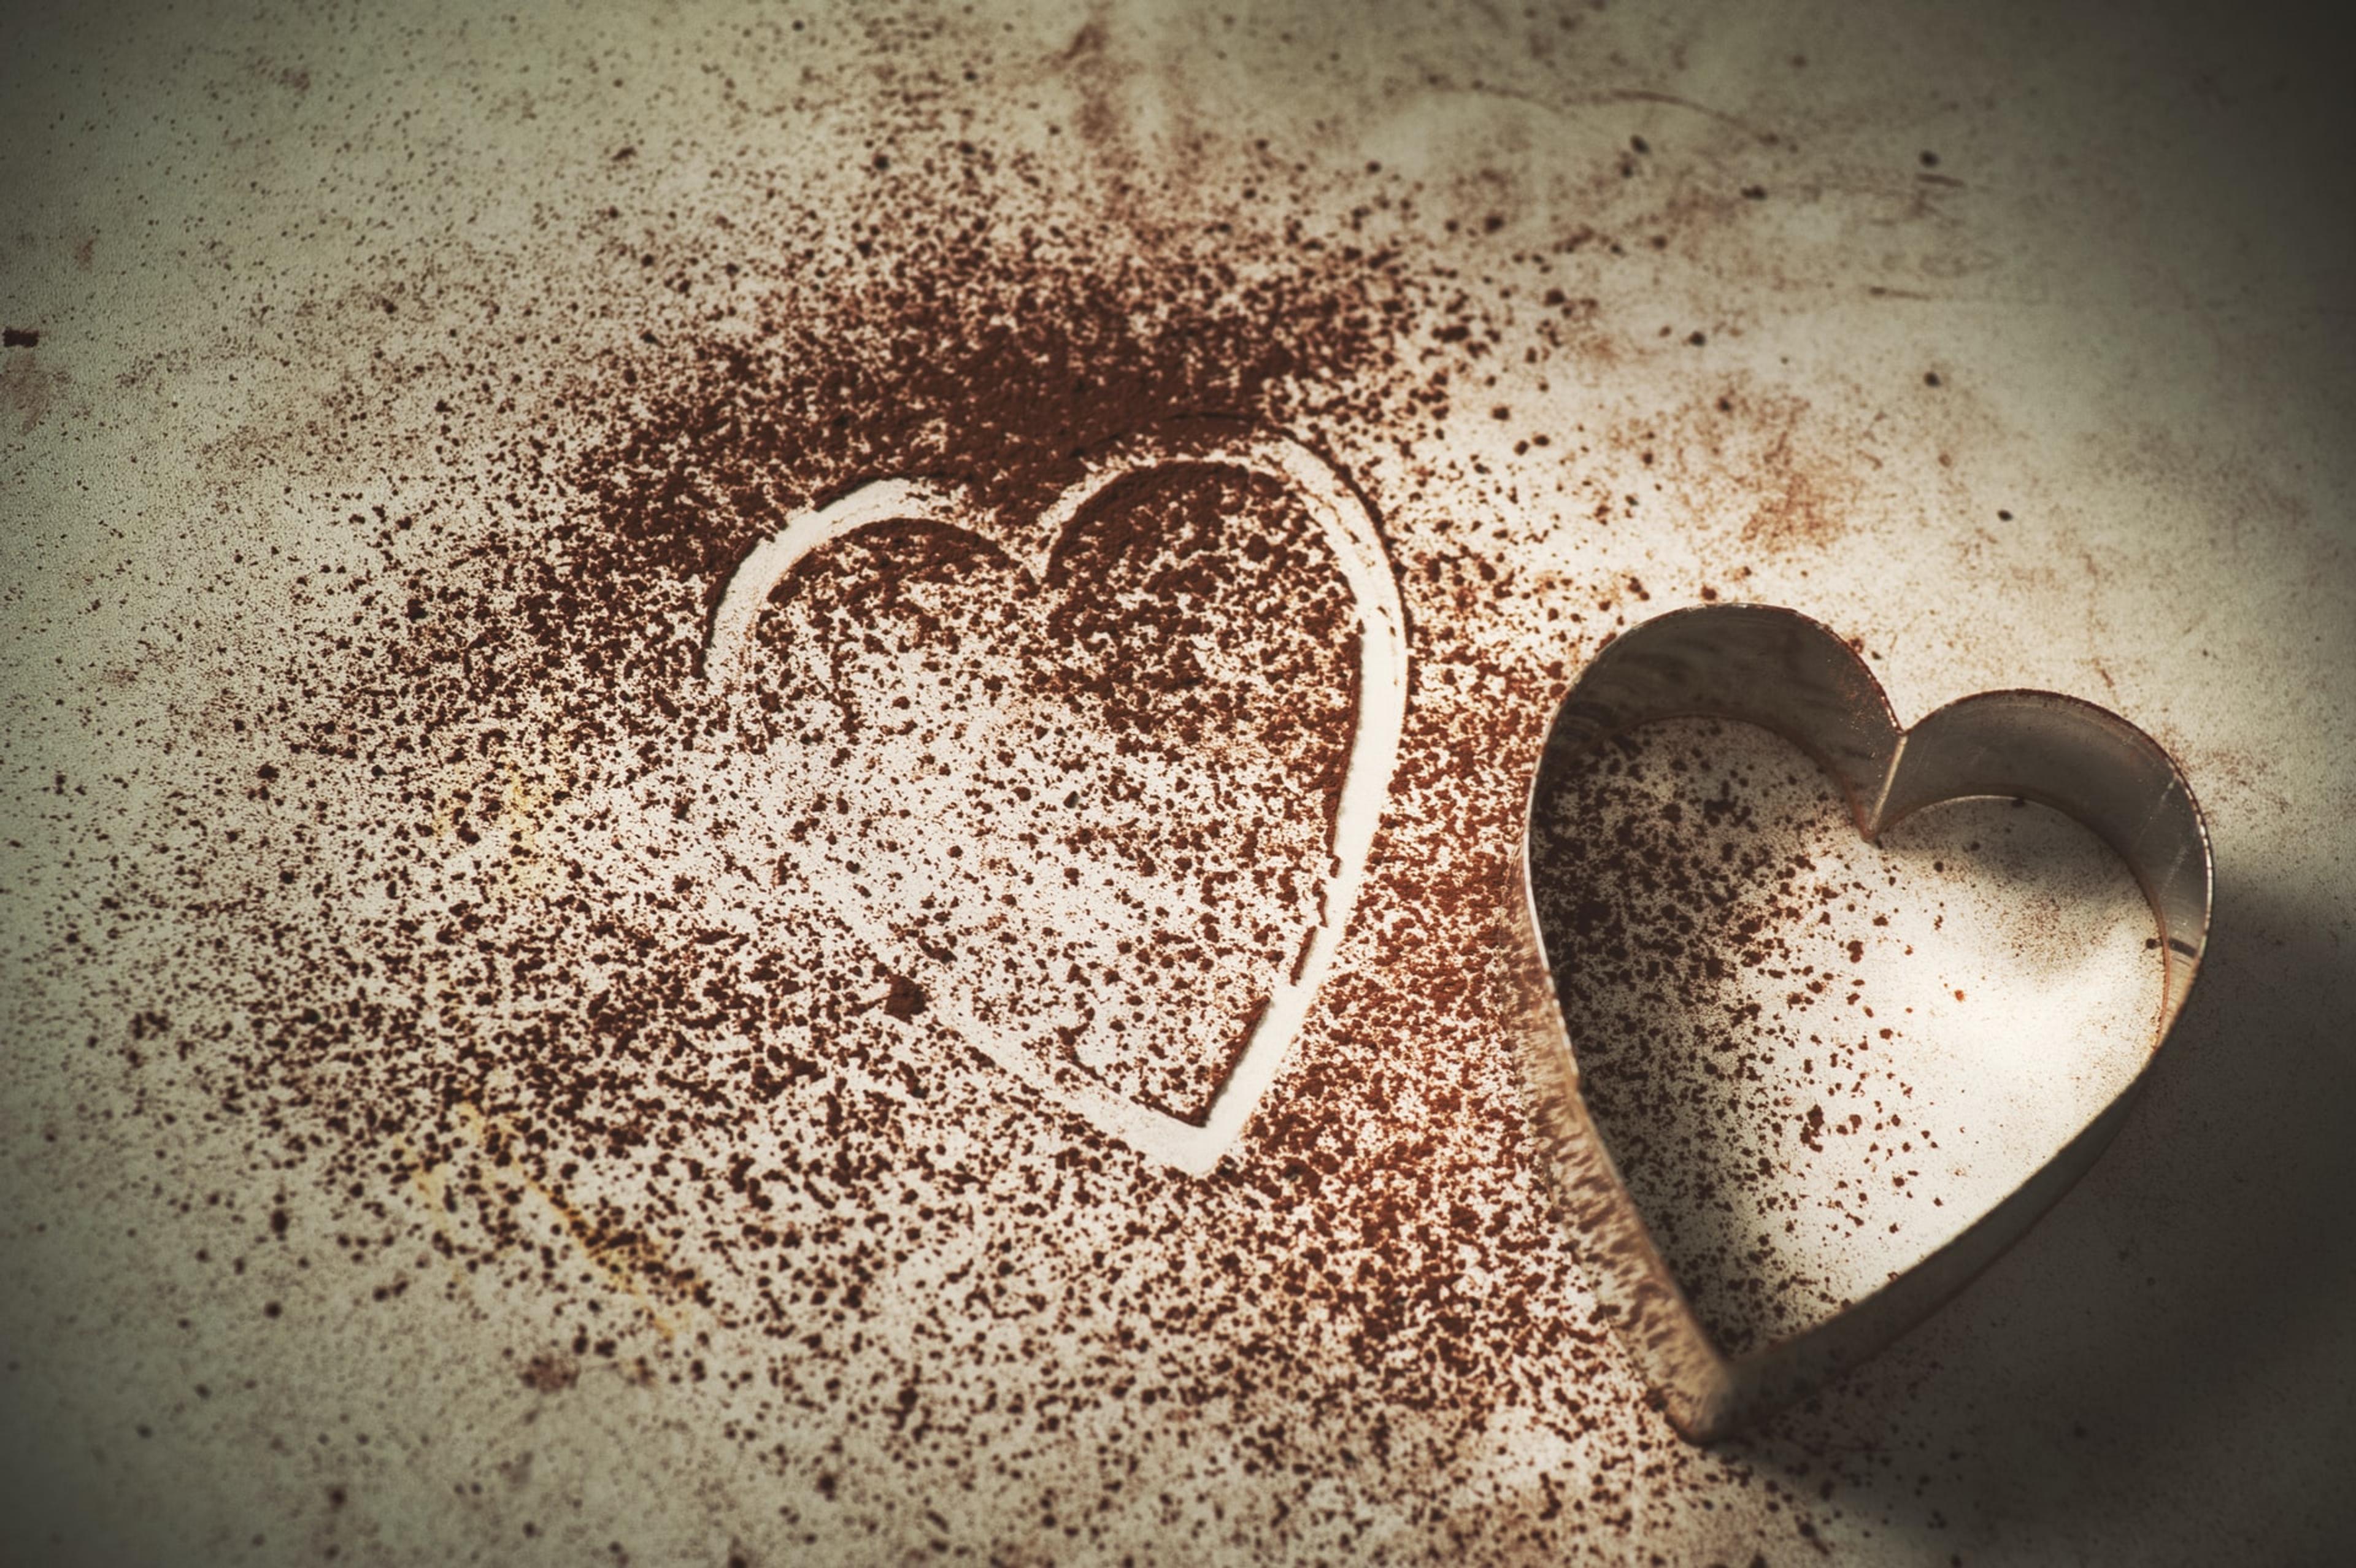 A heart-shaped cookie cutter on a surface next to spilled cocoa powder with a heart-shaped outline in it